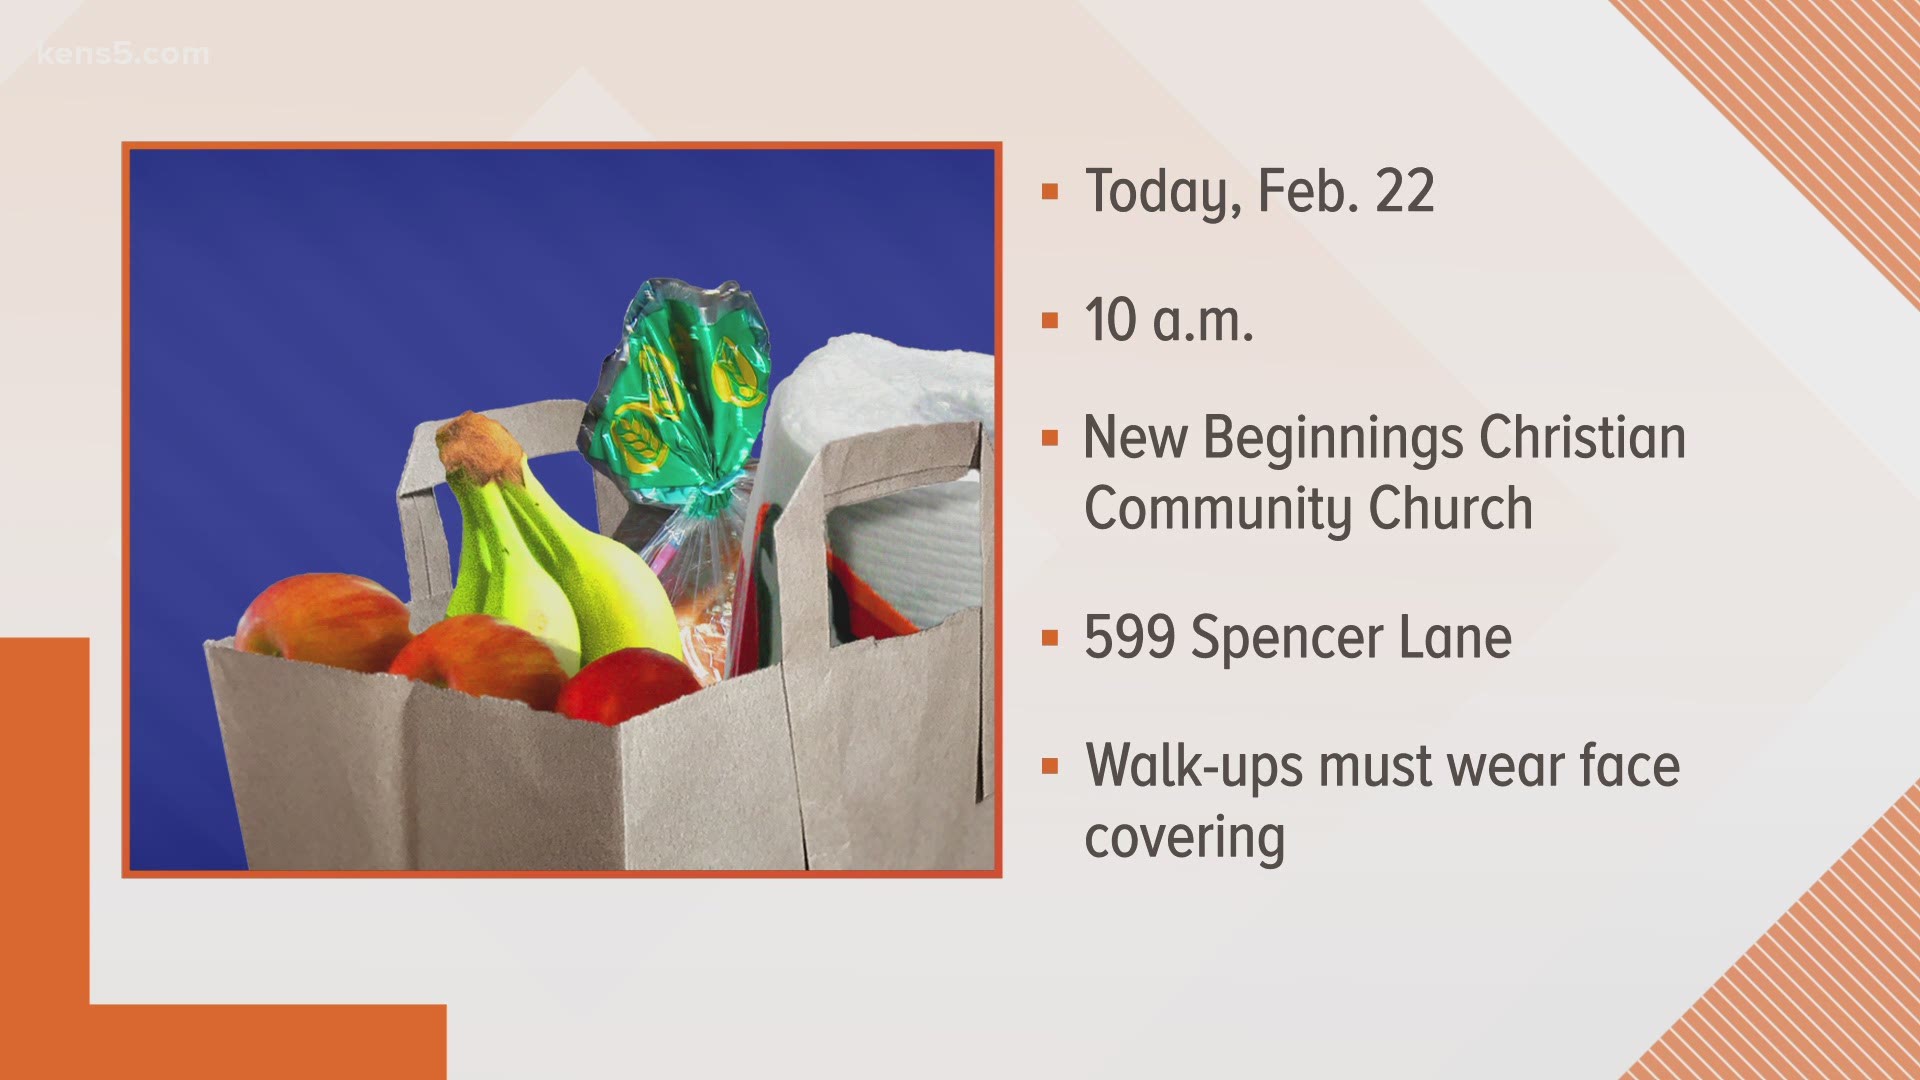 Starting at 10 a.m. Monday, New Beginnings Christian Community Church is passing out about $25,00 worth of food to whoever needs it.